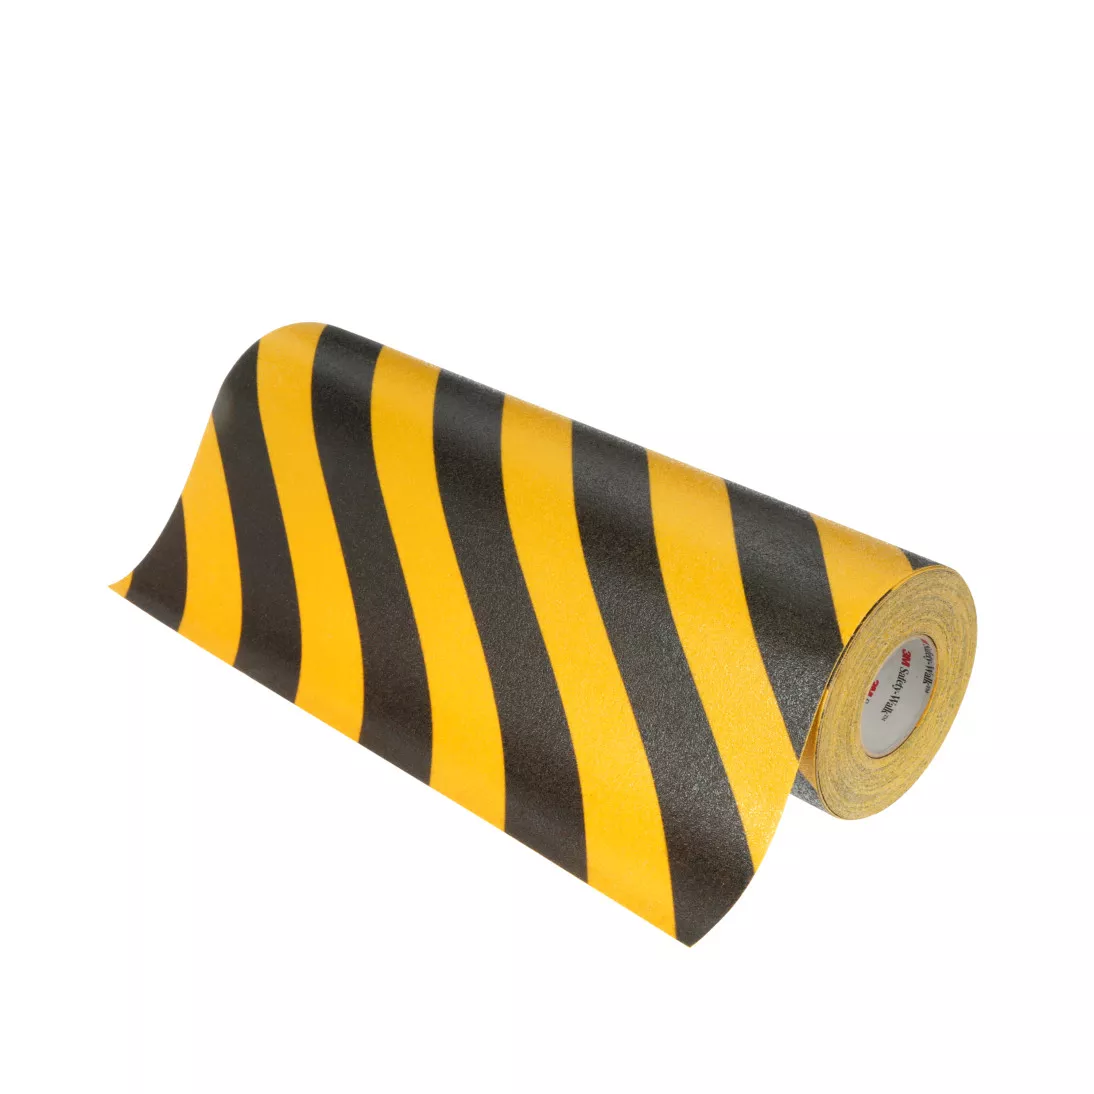 3M™ Safety-Walk™ Slip-Resistant General Purpose Tapes & Treads 613,
Black/Yellow Stripe, 24 in x 60 ft, Roll, 1/Case